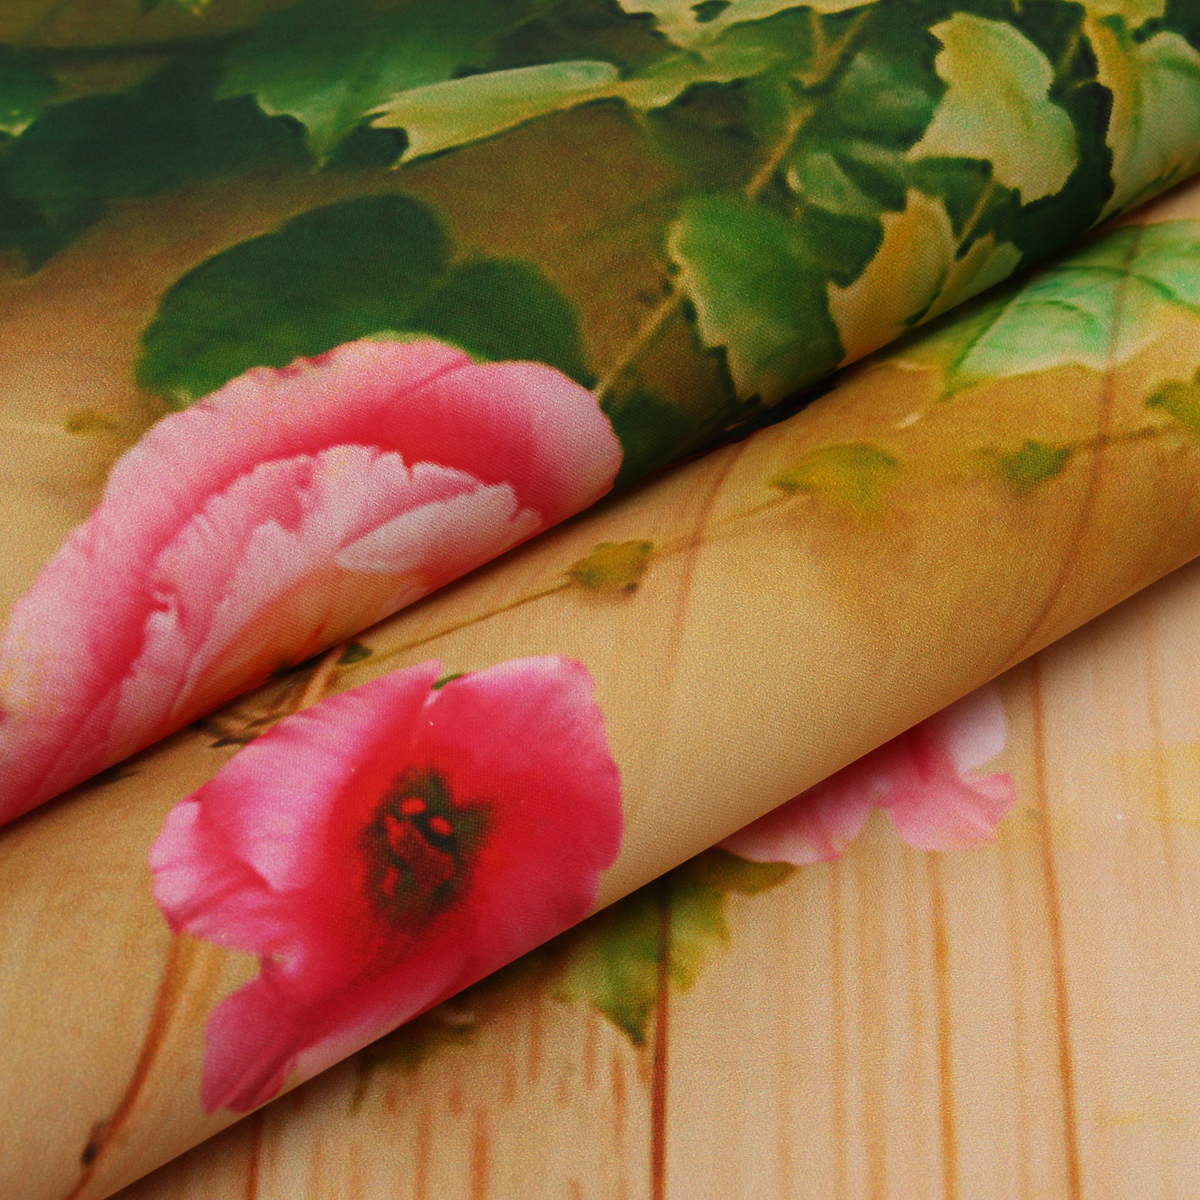 Mohoo-15x21m-Flowers-Wooden-Board-Studio-Props-Photography-Backdrop-Background-Silk-Material-1958137-4